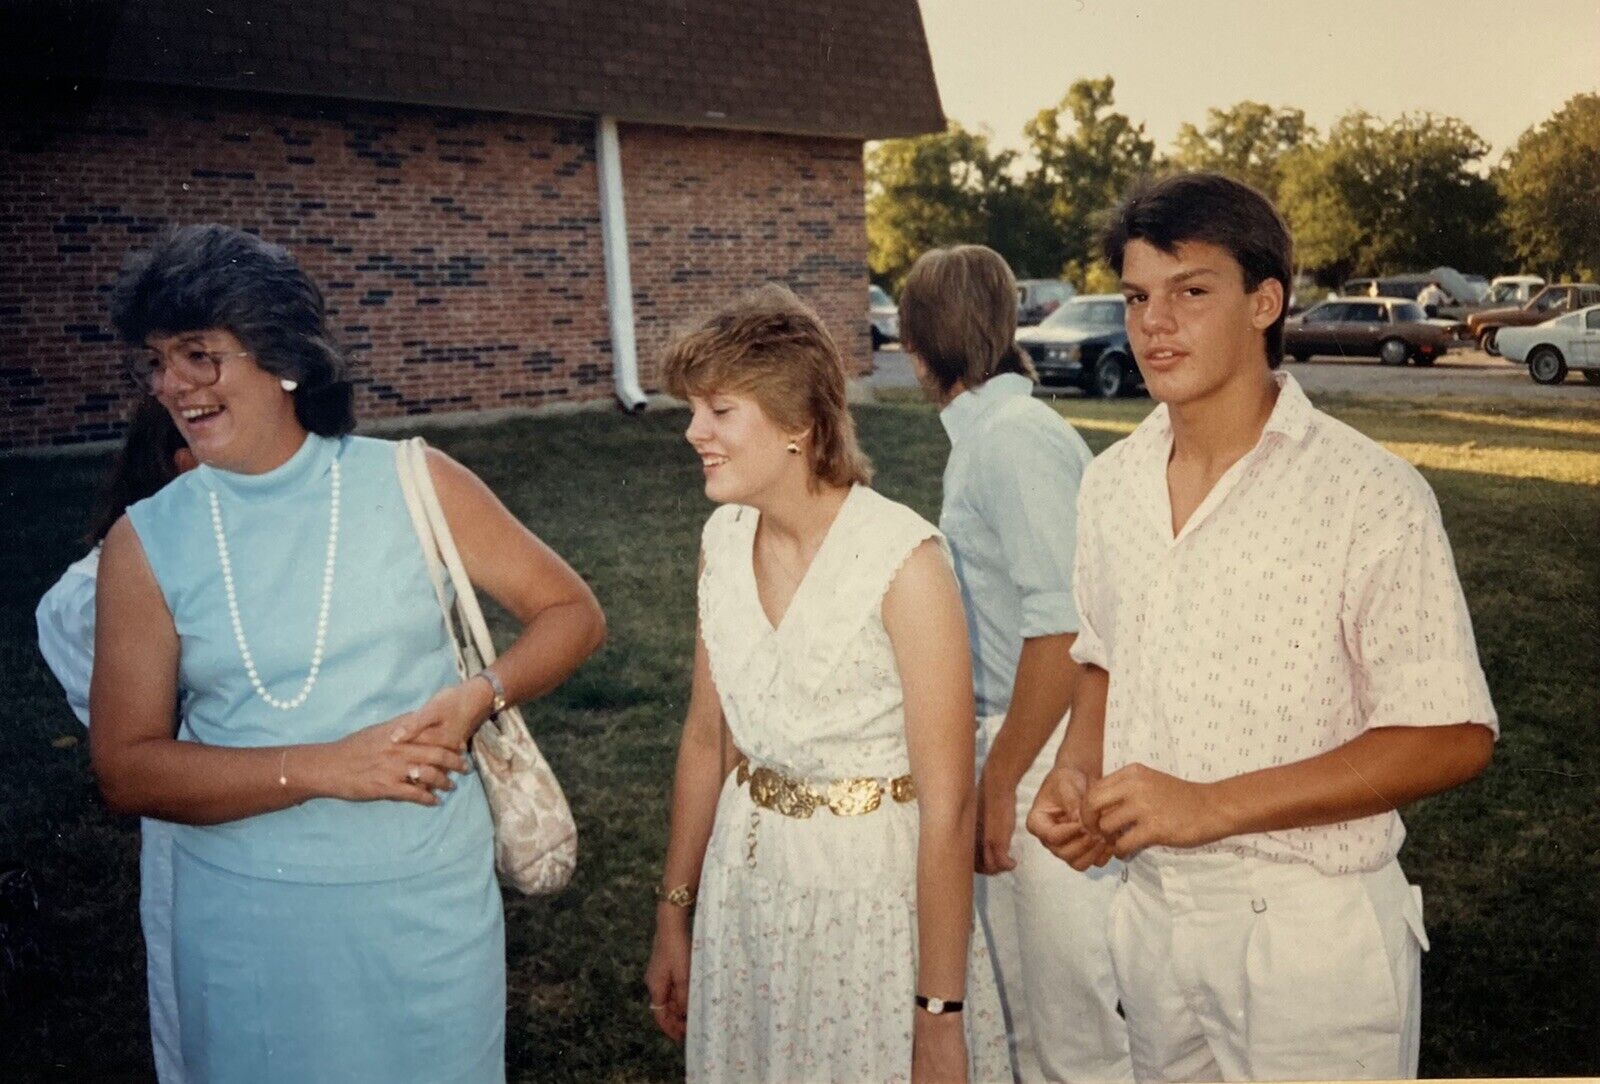 Family Color Photograph Vintage 1980’s Dress Mom In Pearls Good Looking Man